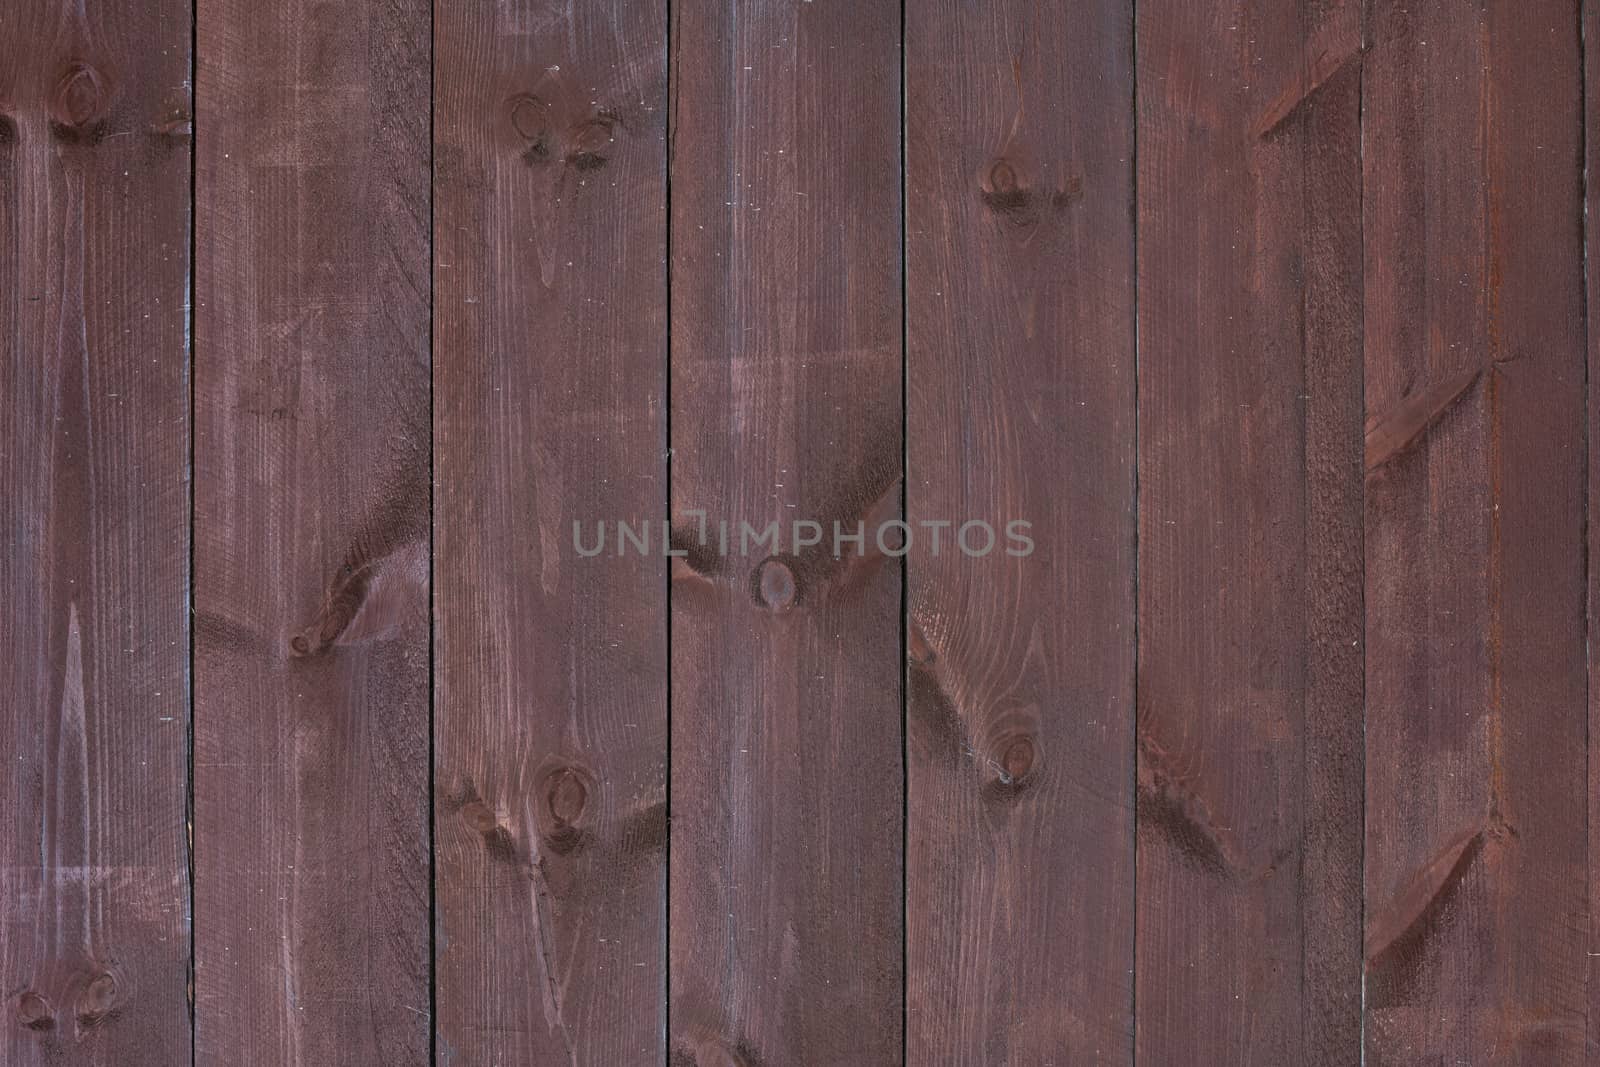 Wood texture with natural wood pattern for design, decoration